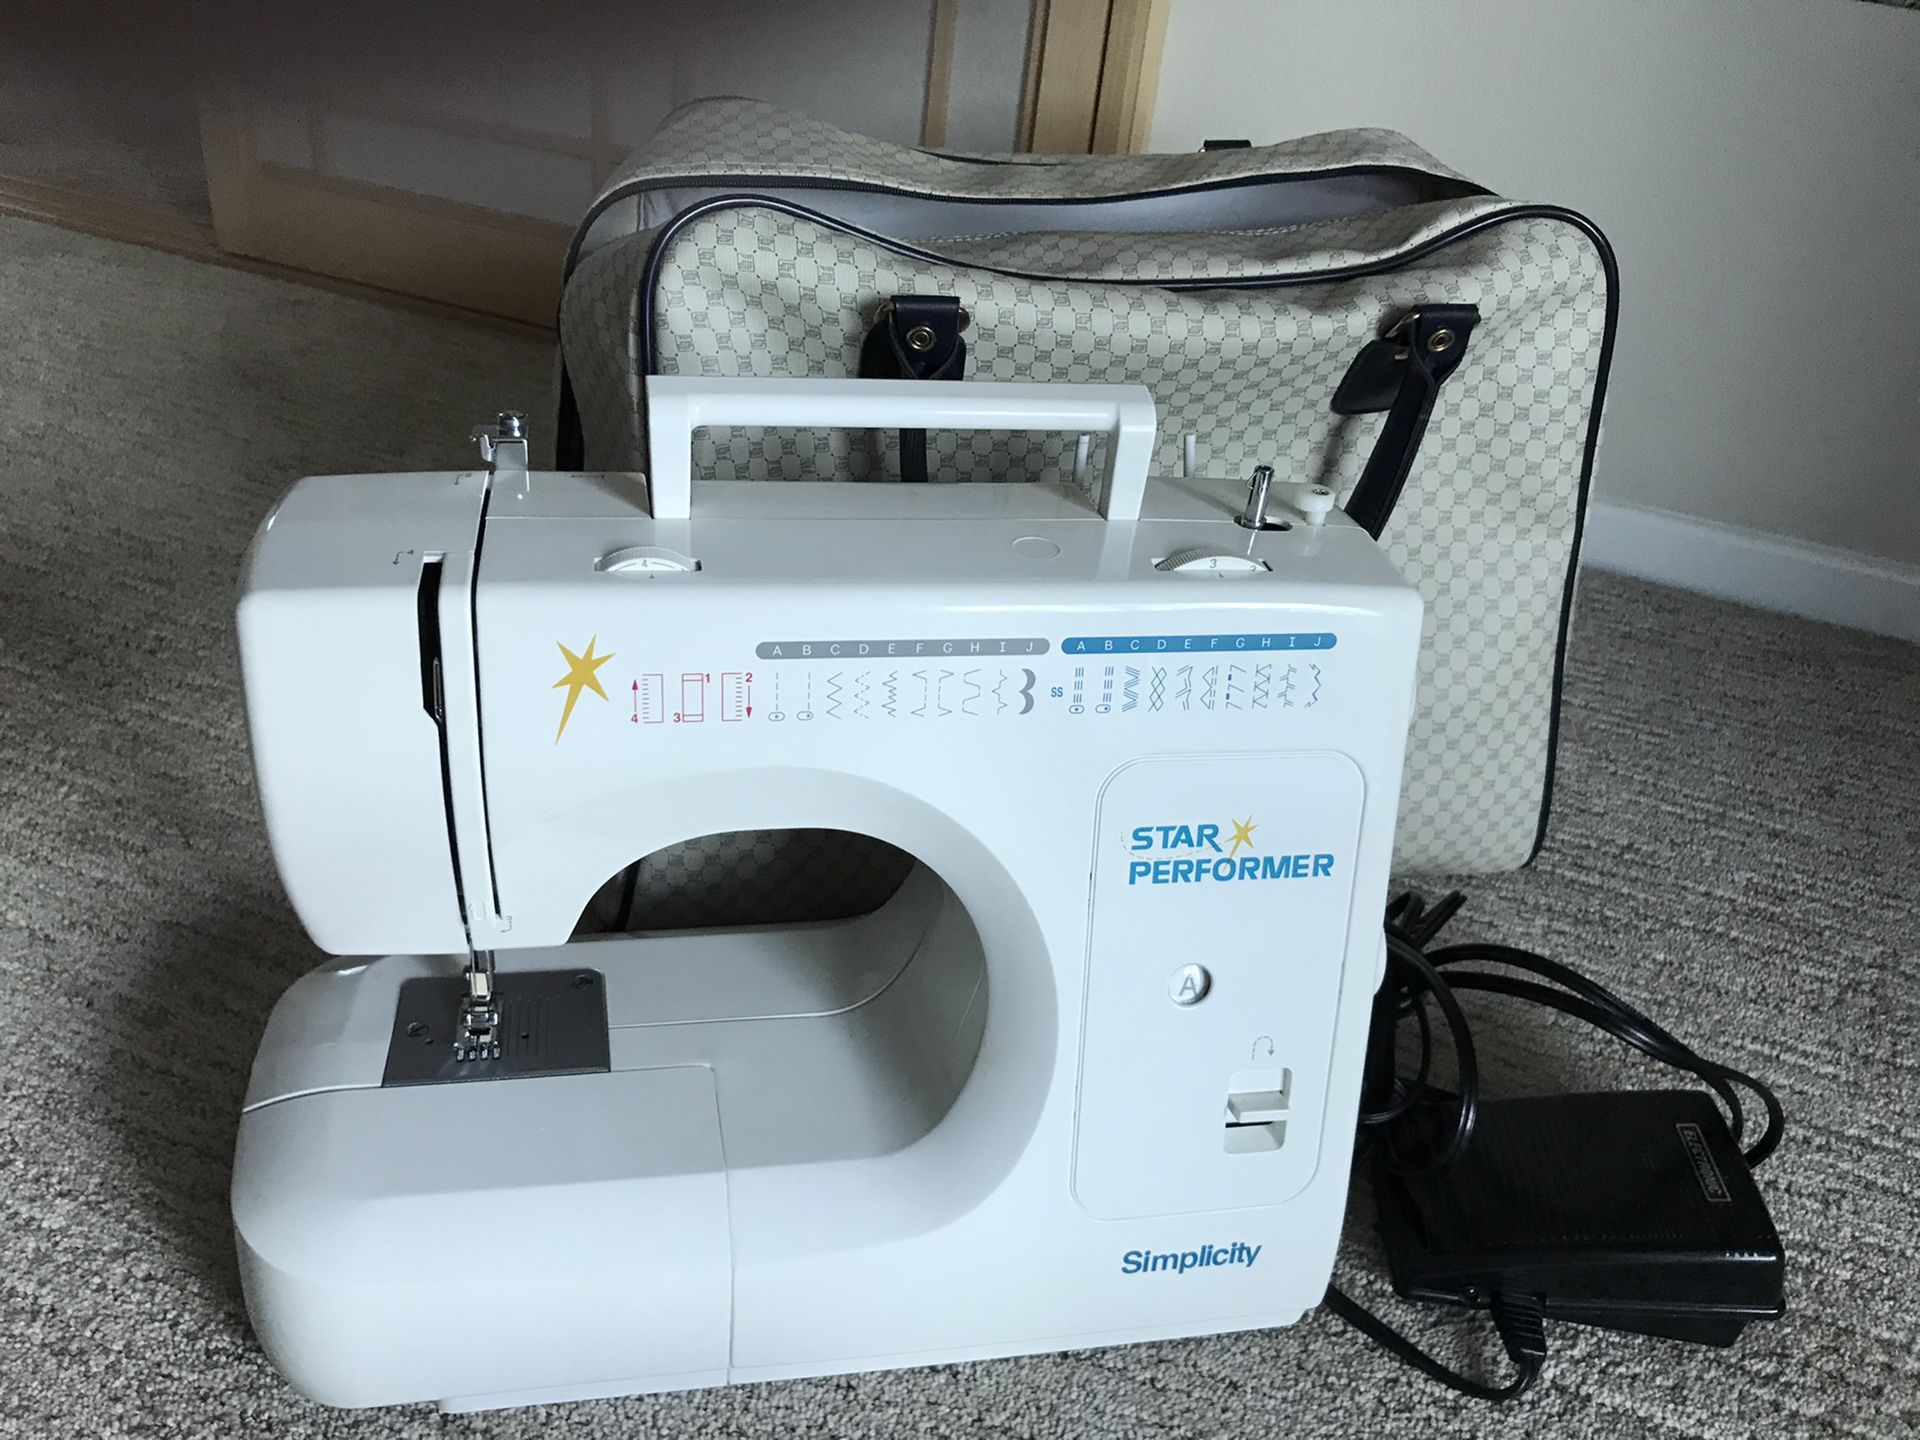 Simplicity Sewing Machine Model 630 for Sale in Los Angeles, CA - OfferUp